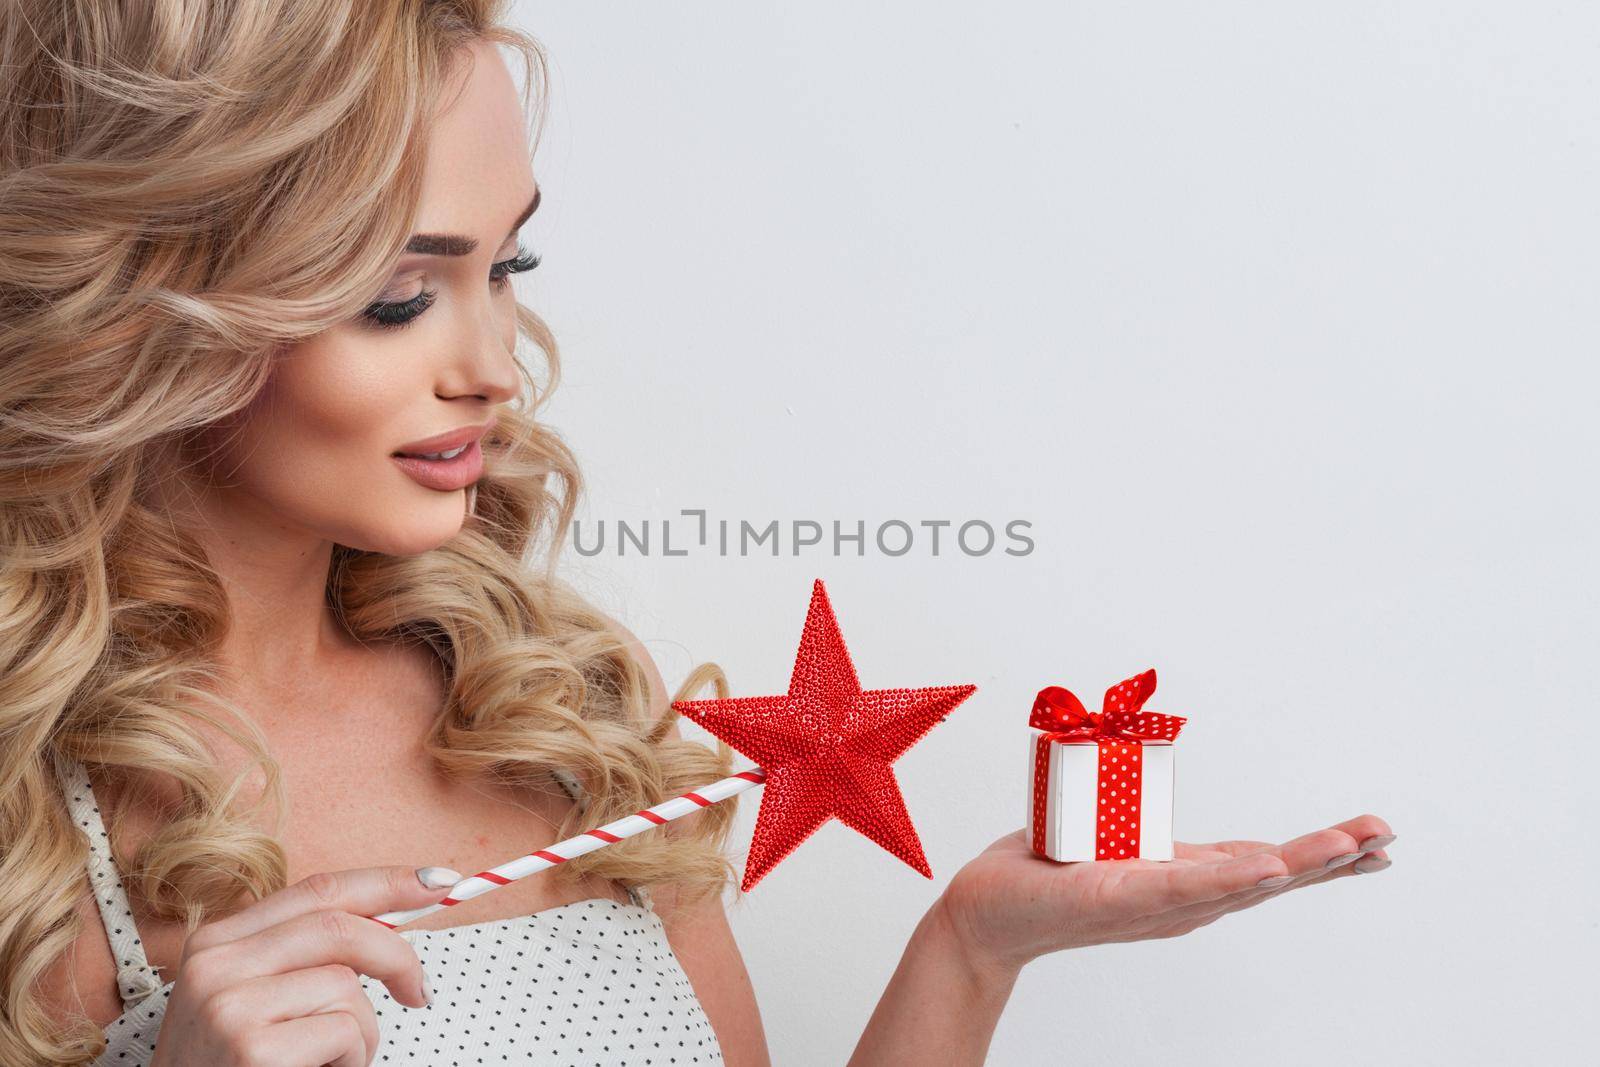 Portrait of a girl dressed in white dress holding magic wand and a present box over white background